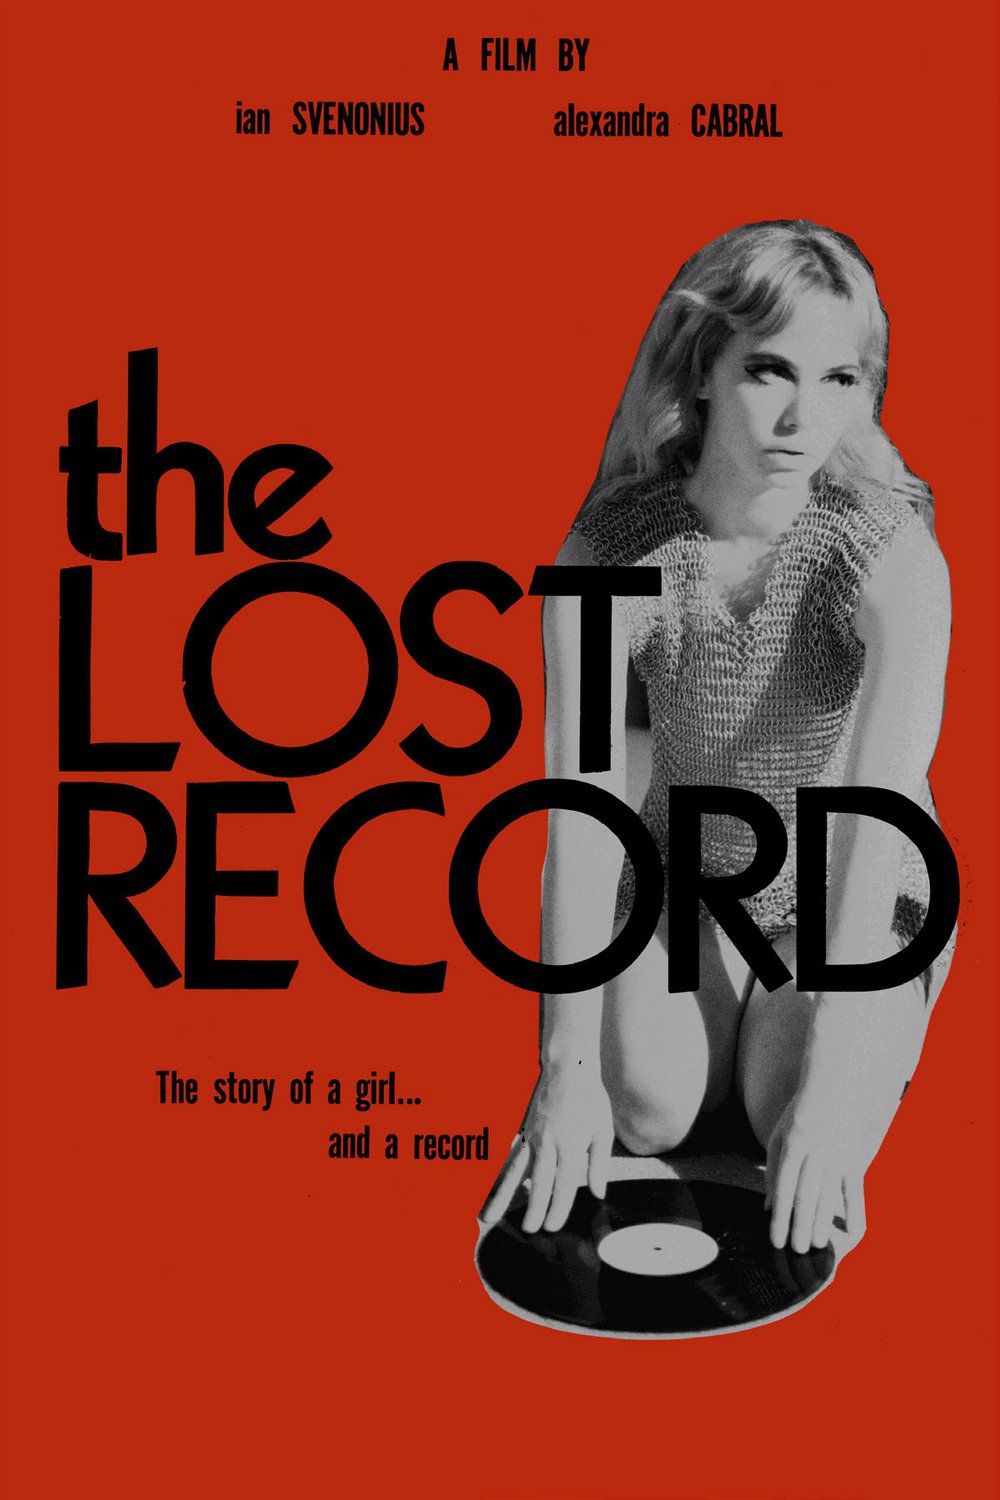 Screening of “The Lost Record” with Q&A Featuring Ian Svenonius and Alexandra Cabral